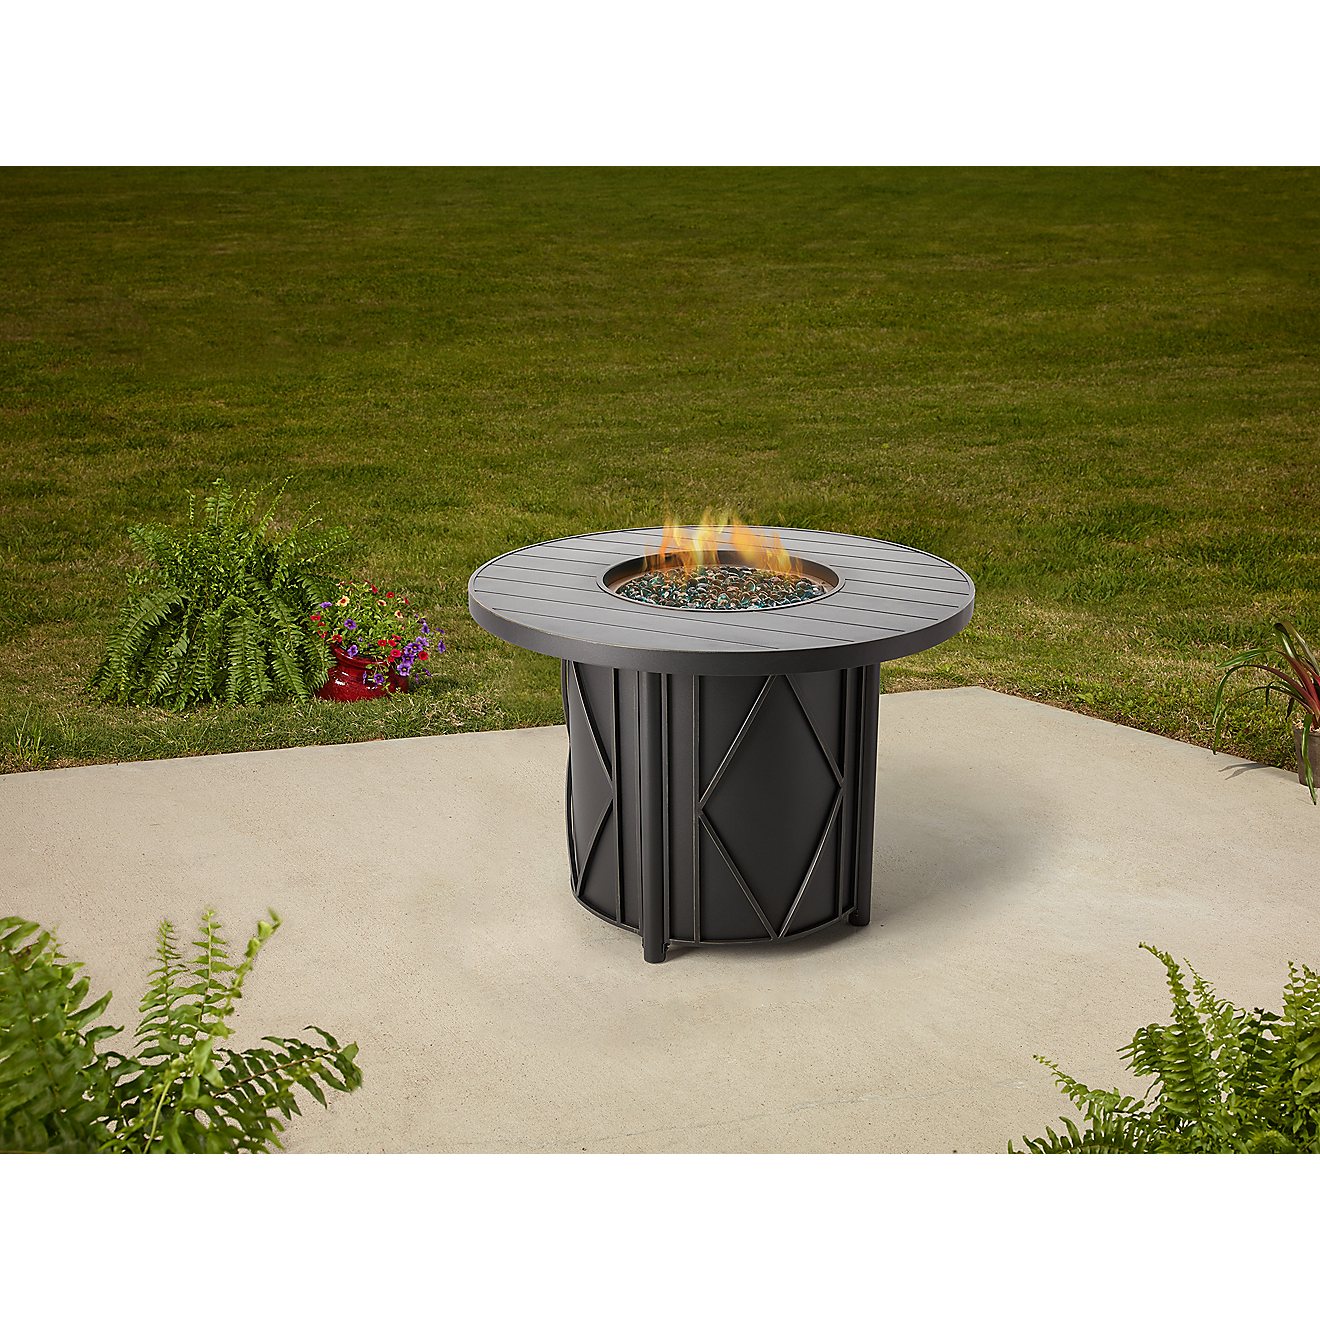 Mosaic Kingsland Round Top Gas Fire Pit, Top Rated Gas Fire Pits